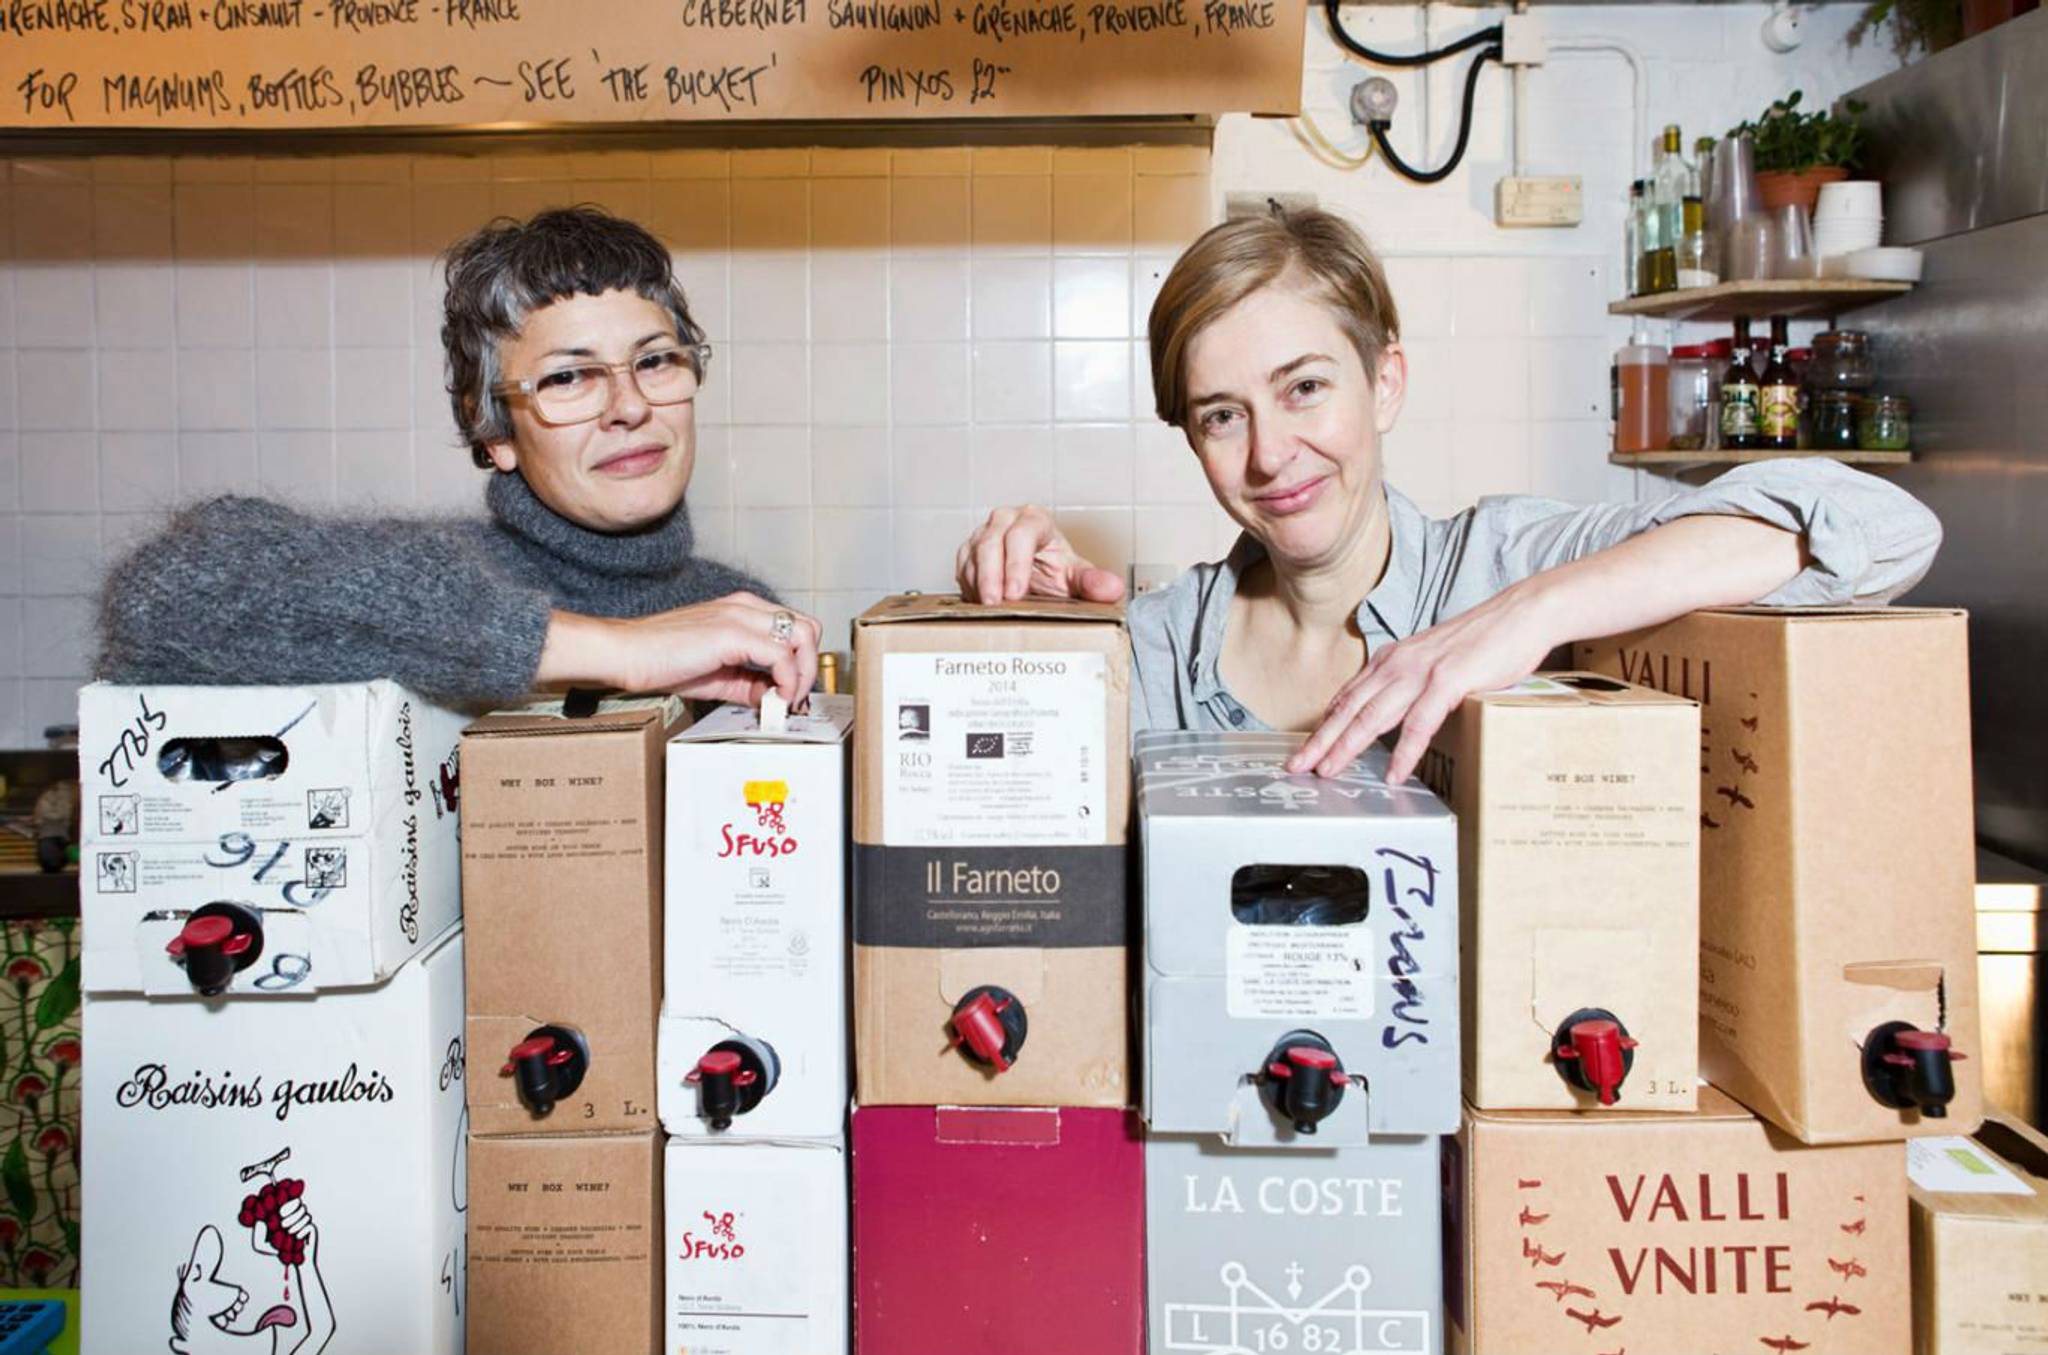 Drink boxed wine in London bars and restaurants